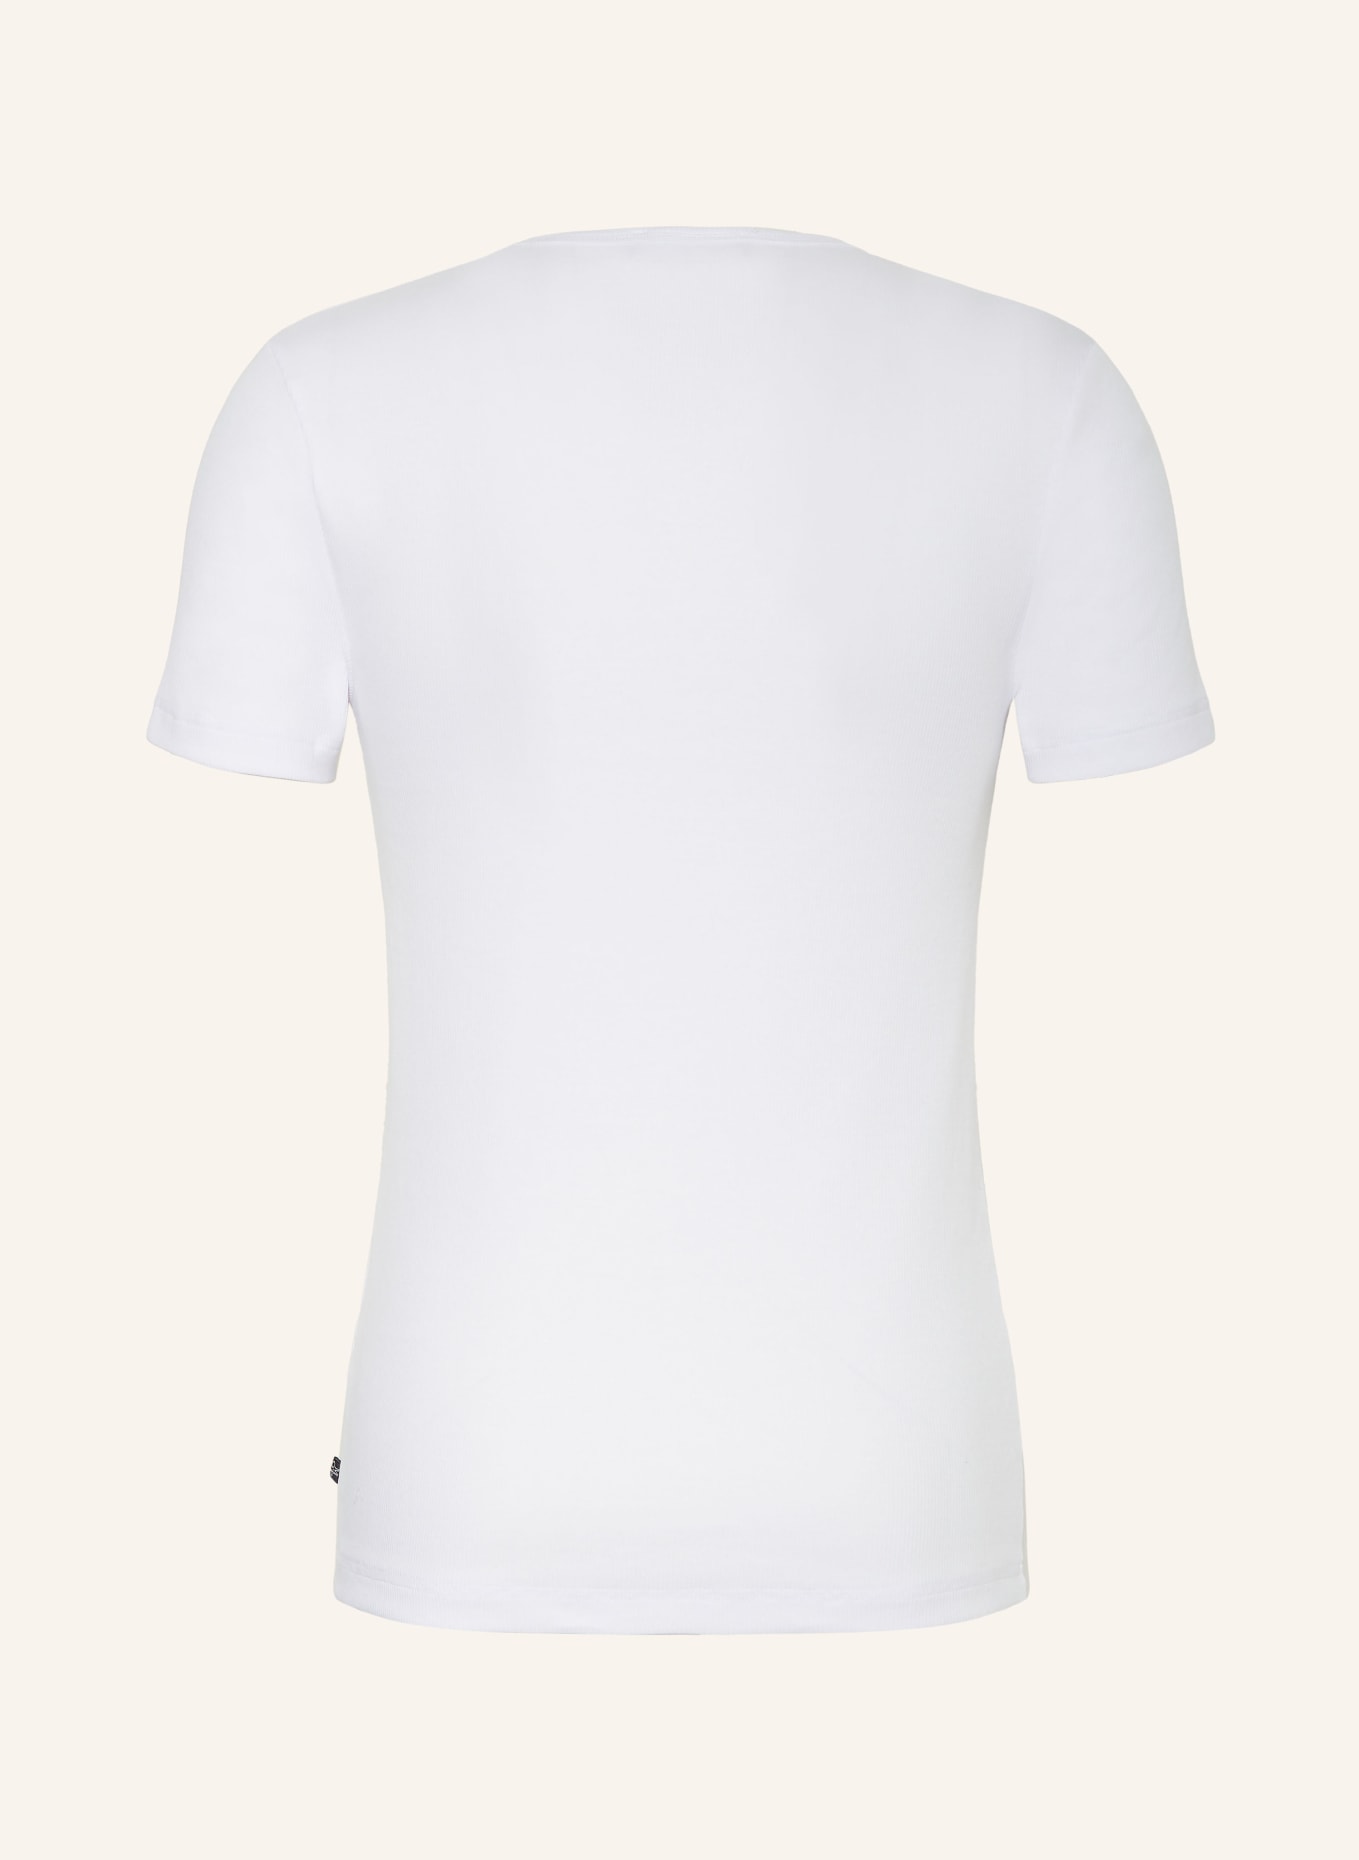 Marc O'Polo 2er-Pack T-Shirts, Farbe: WEISS (Bild 2)